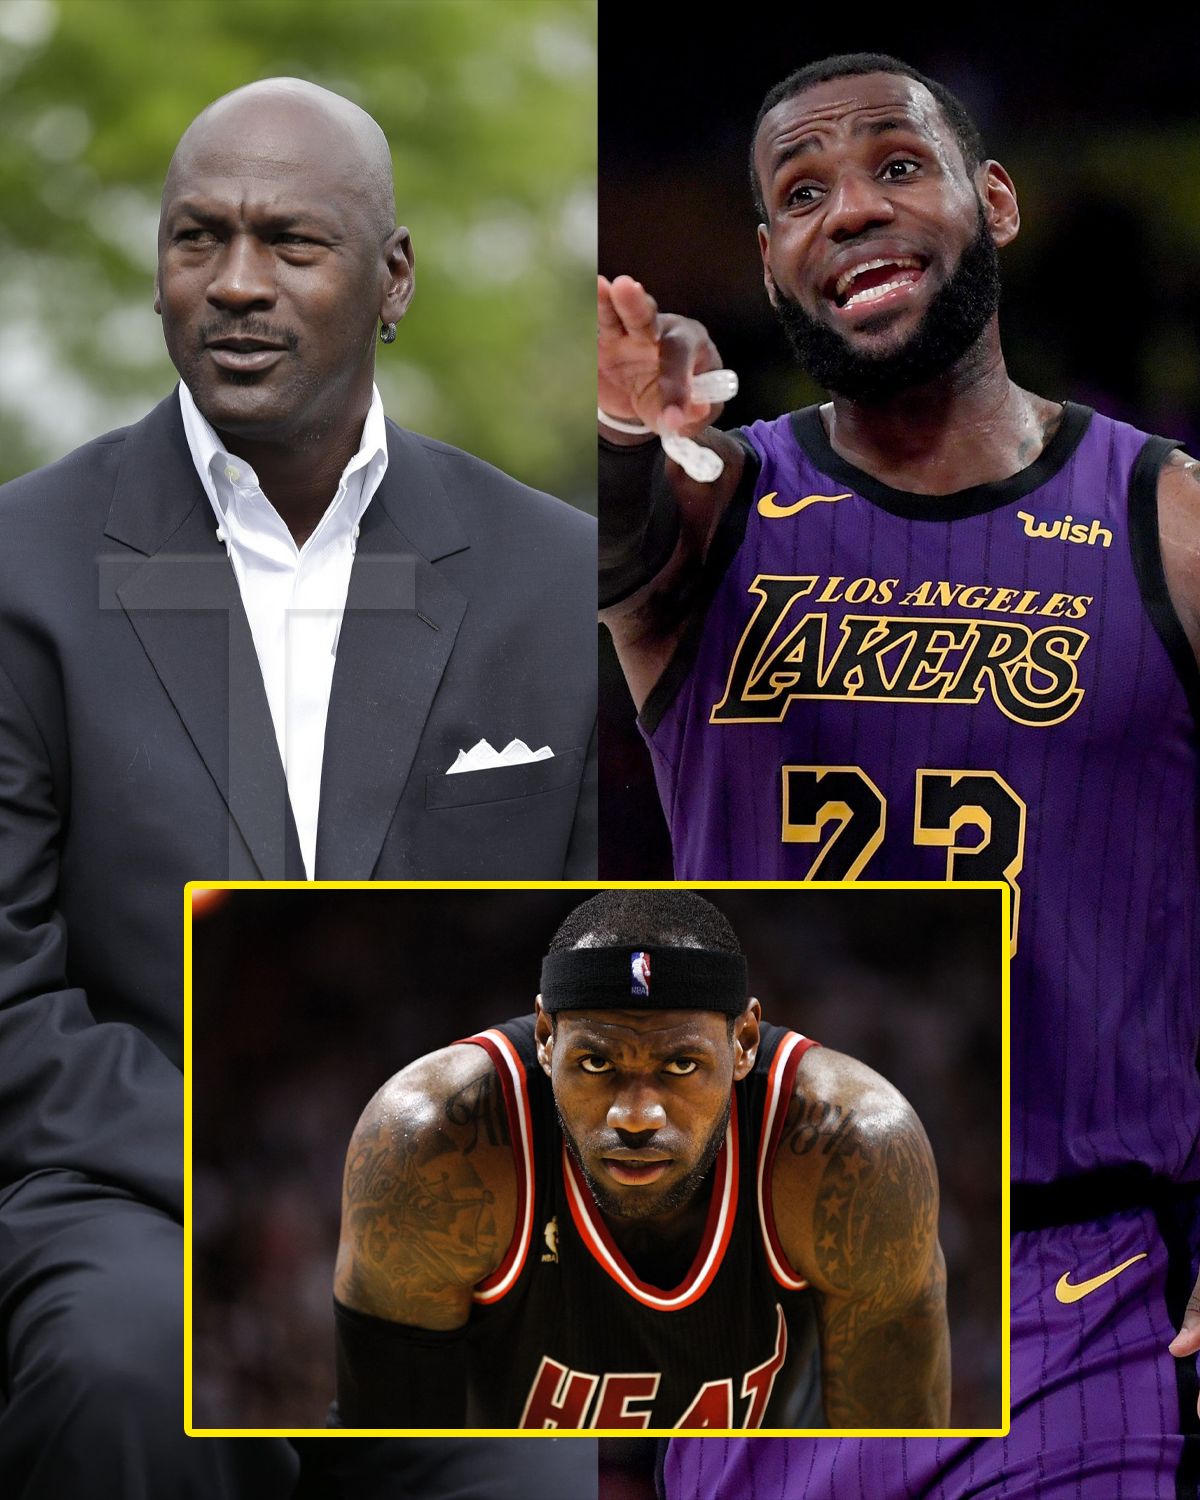 Michael Jordan Reacts to LeBron James’ Surprise Paternity: “I Hope They ...